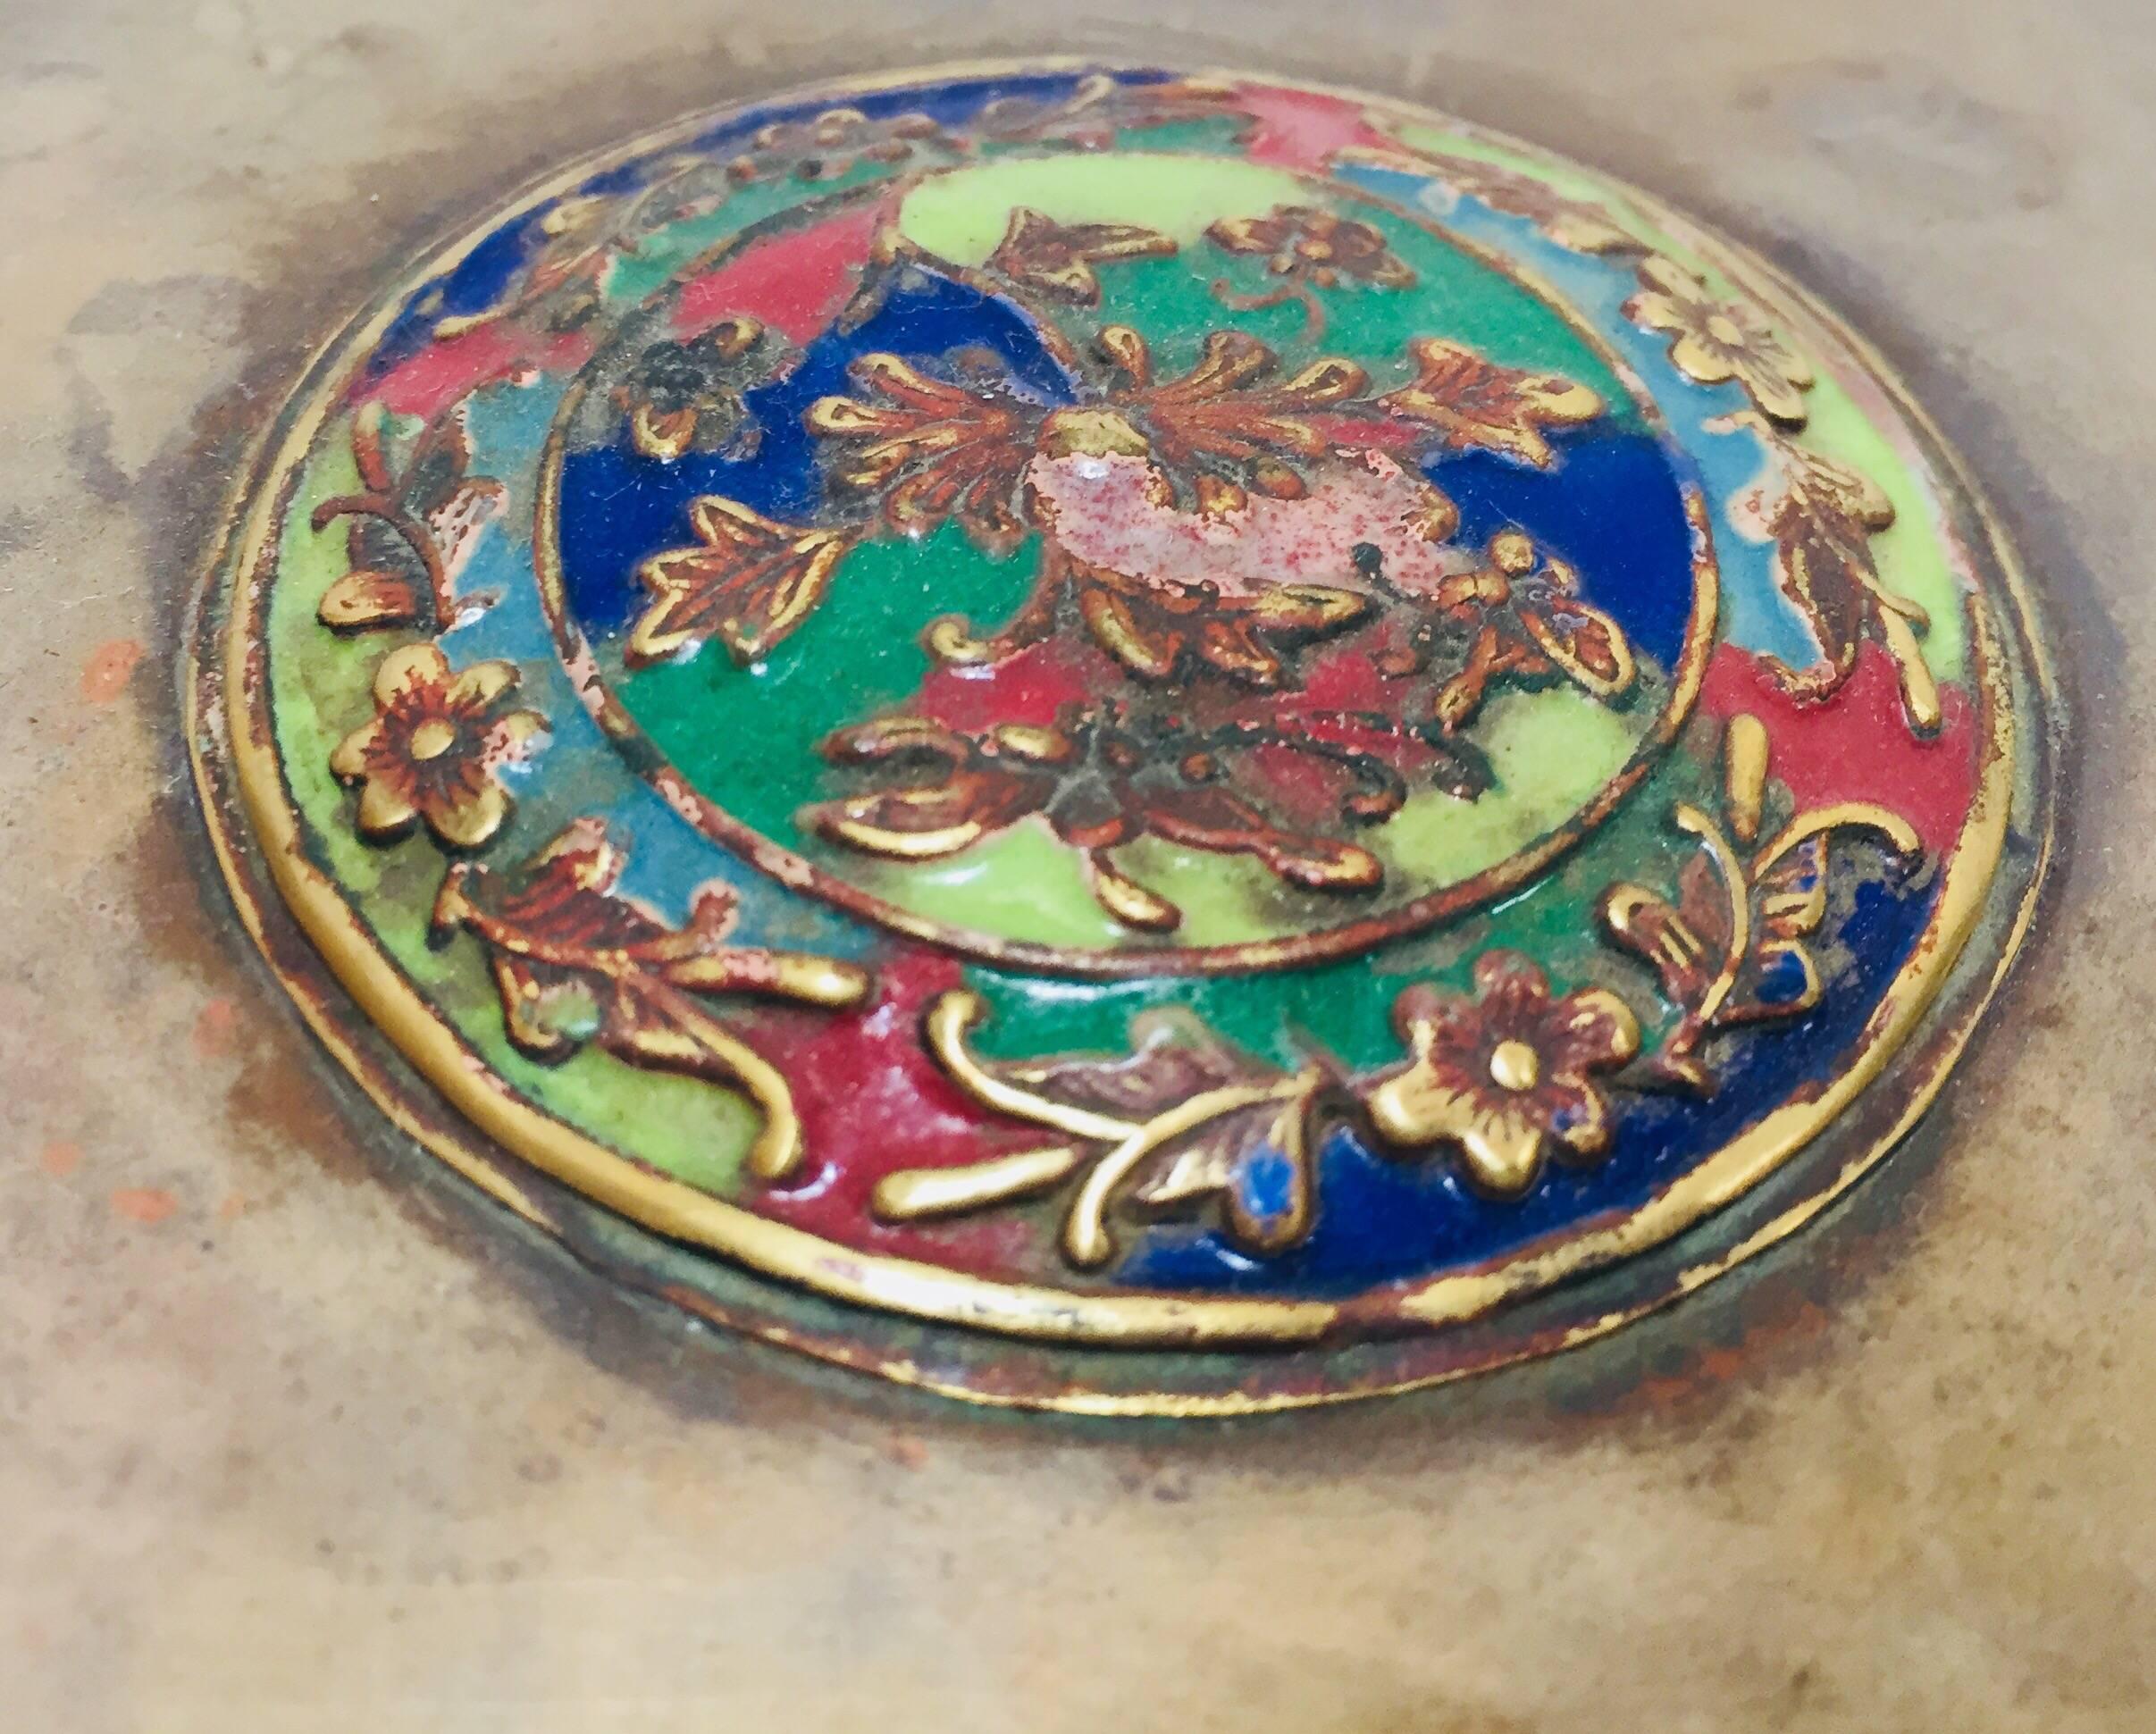 American Brass Art Deco Lidded Box with Enameled Decoration